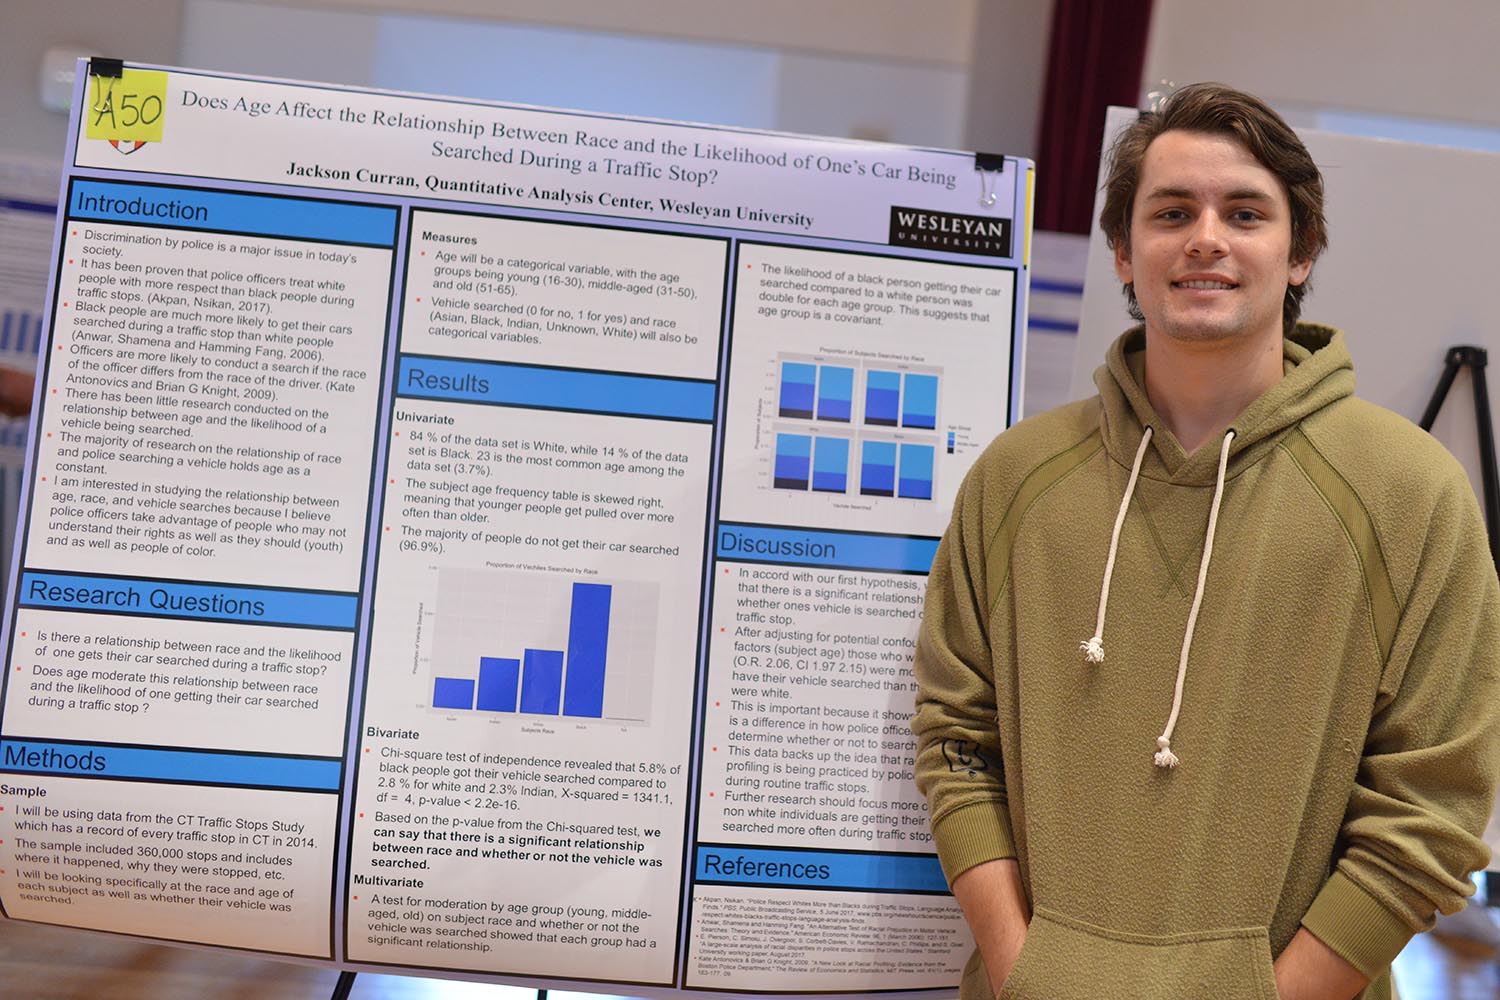 Jackson Curran '21 spoke about his study titled, "Does Age Affect the Relationship Between Race and Likelihood of One's Car Being Searched During a Traffic Stop?"